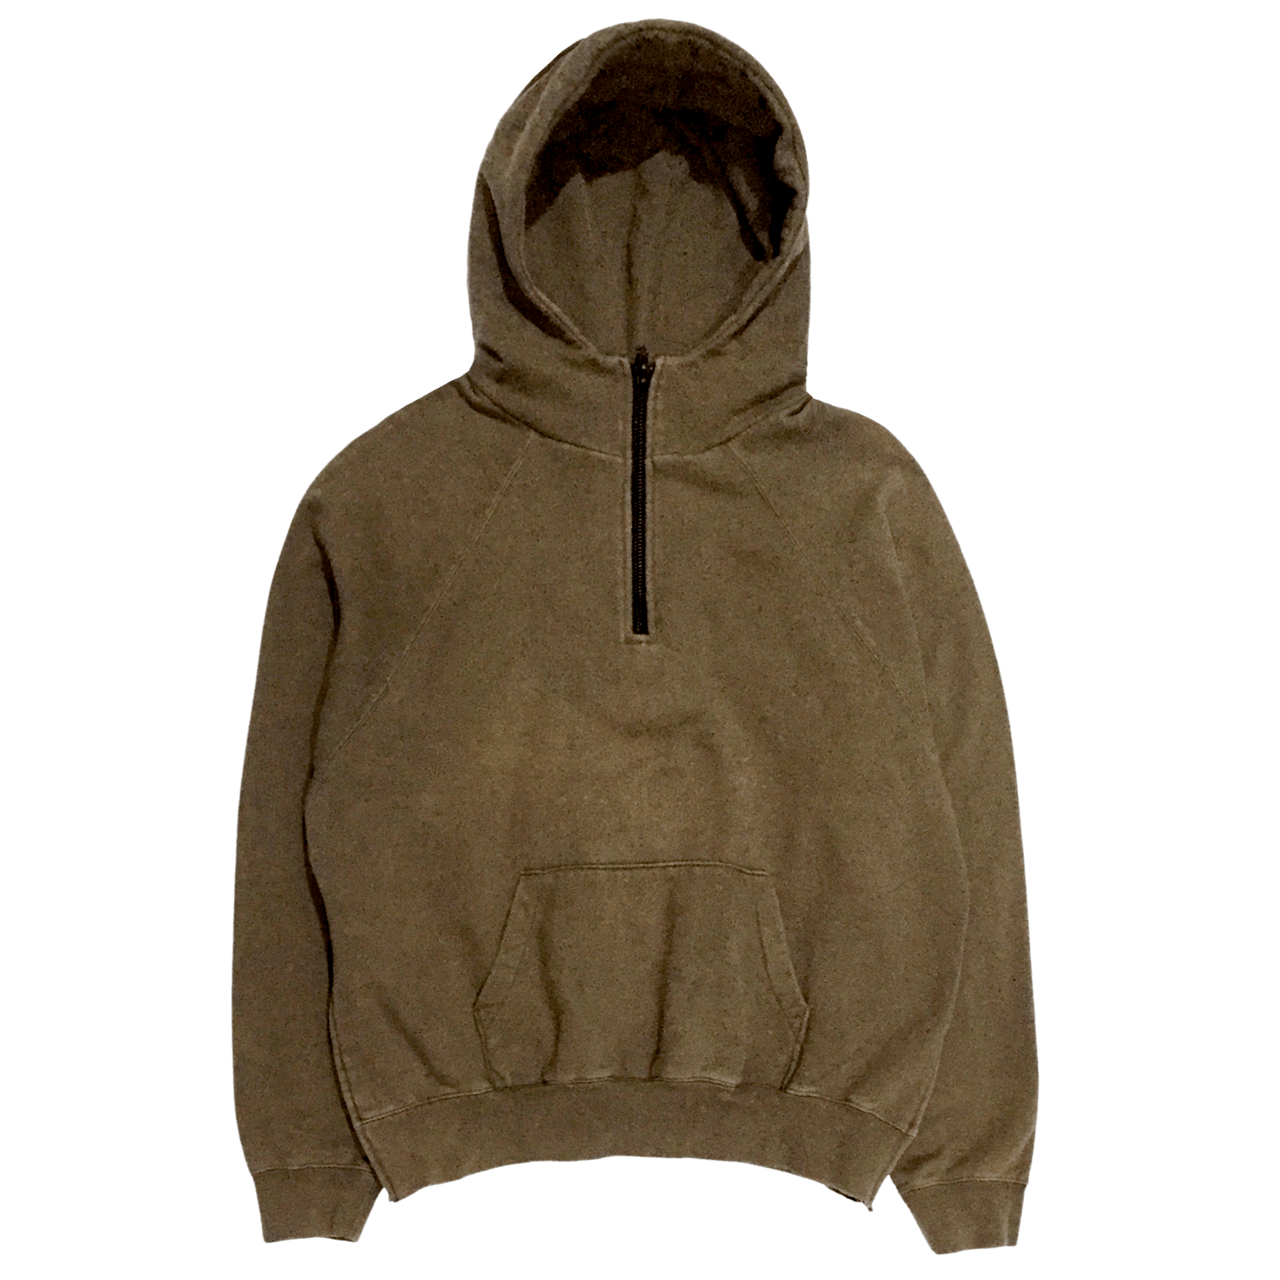 Fear Of God x Pacsun Olive Green Half Zip Hoodie